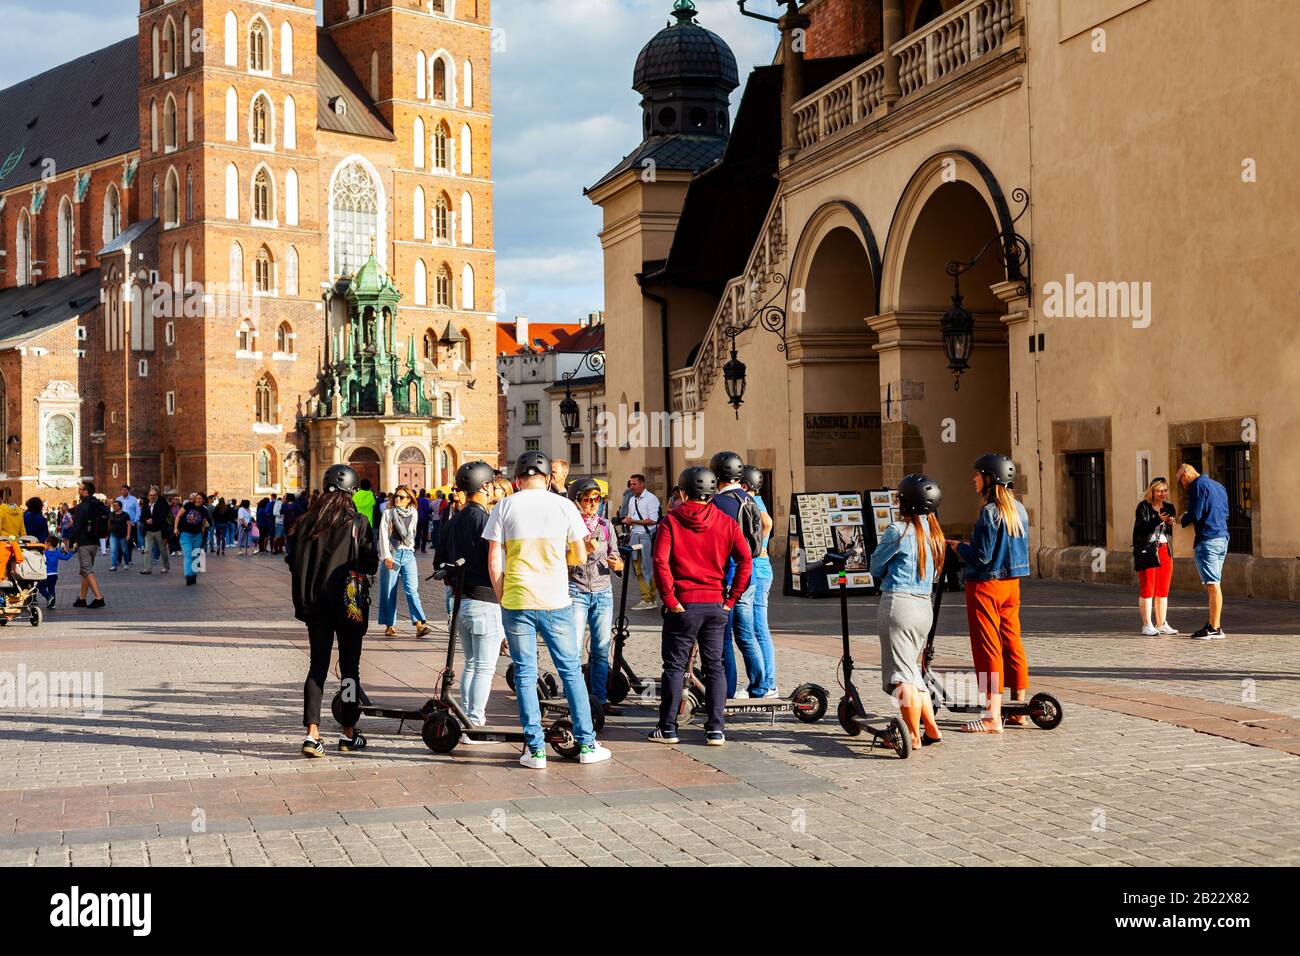 Cracow, Małopolska / Poland - circa December 2019: A group of people on electric scooters standing on the market square in front of St. Mary Basilica. Stock Photo